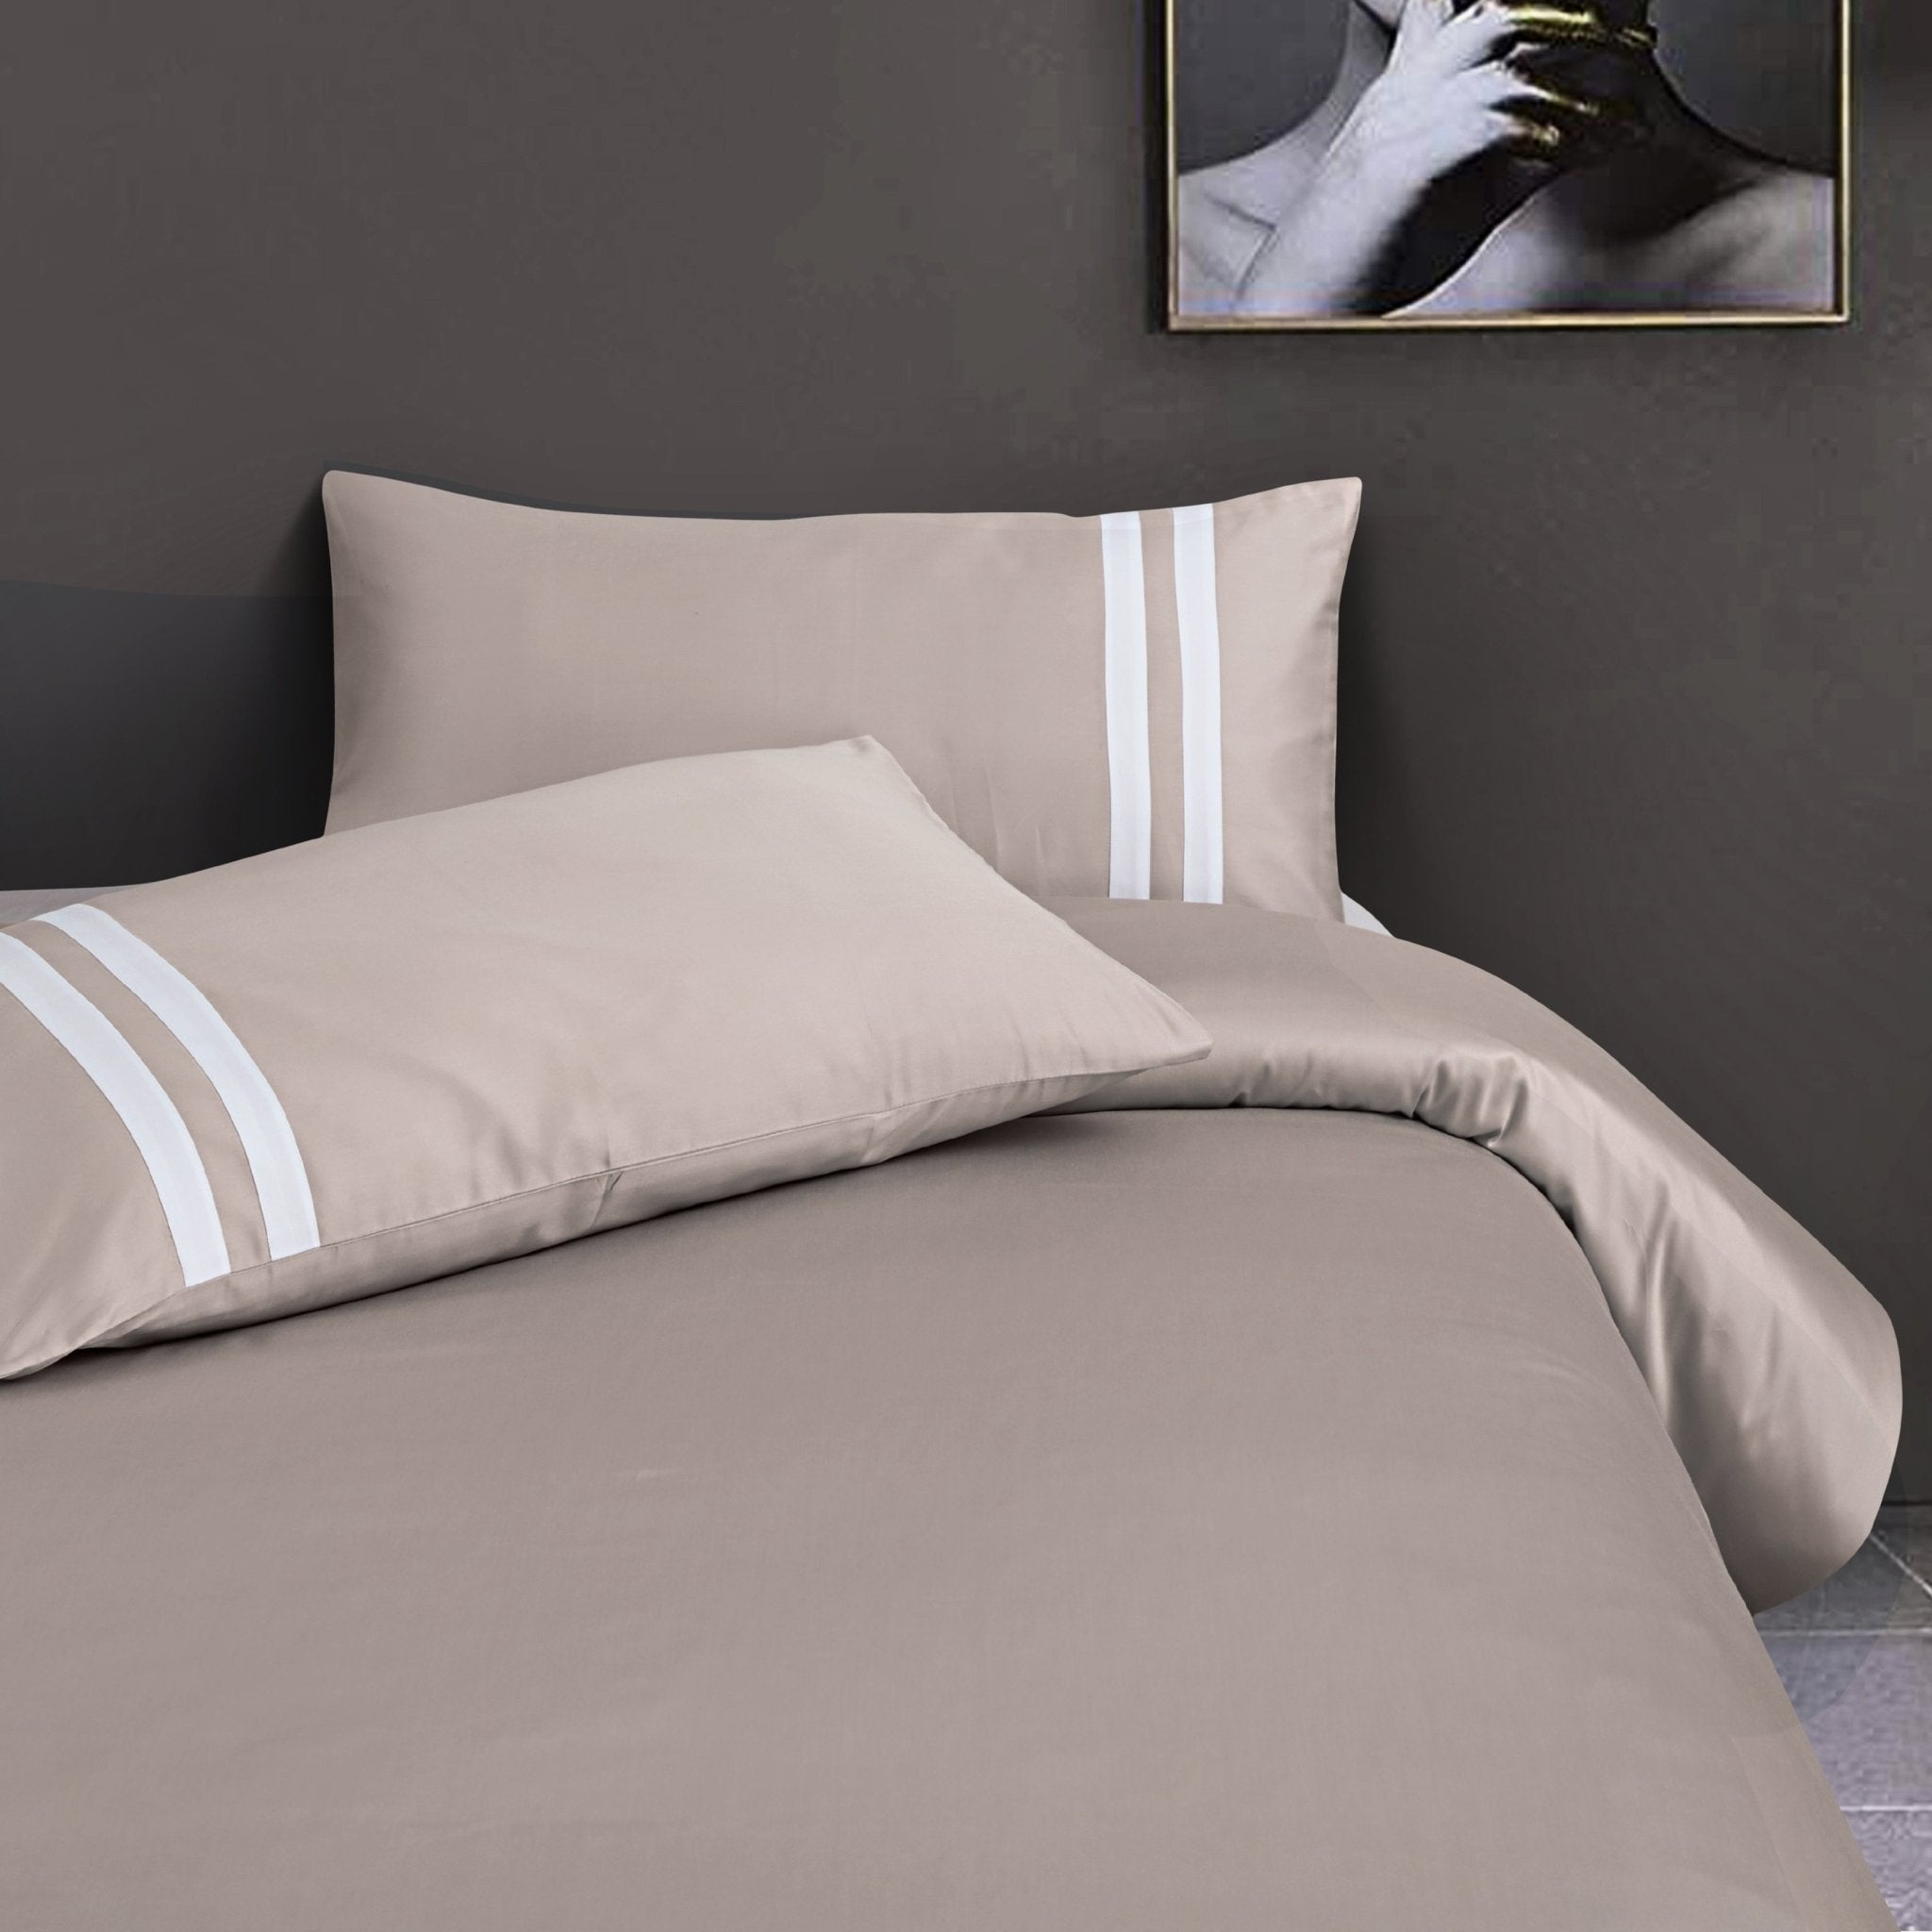 Malako Luxe 550TC 100% Cotton Taupe Brown King Size Plain Bedsheet with 2 Striped Pillow Cases - MALAKO